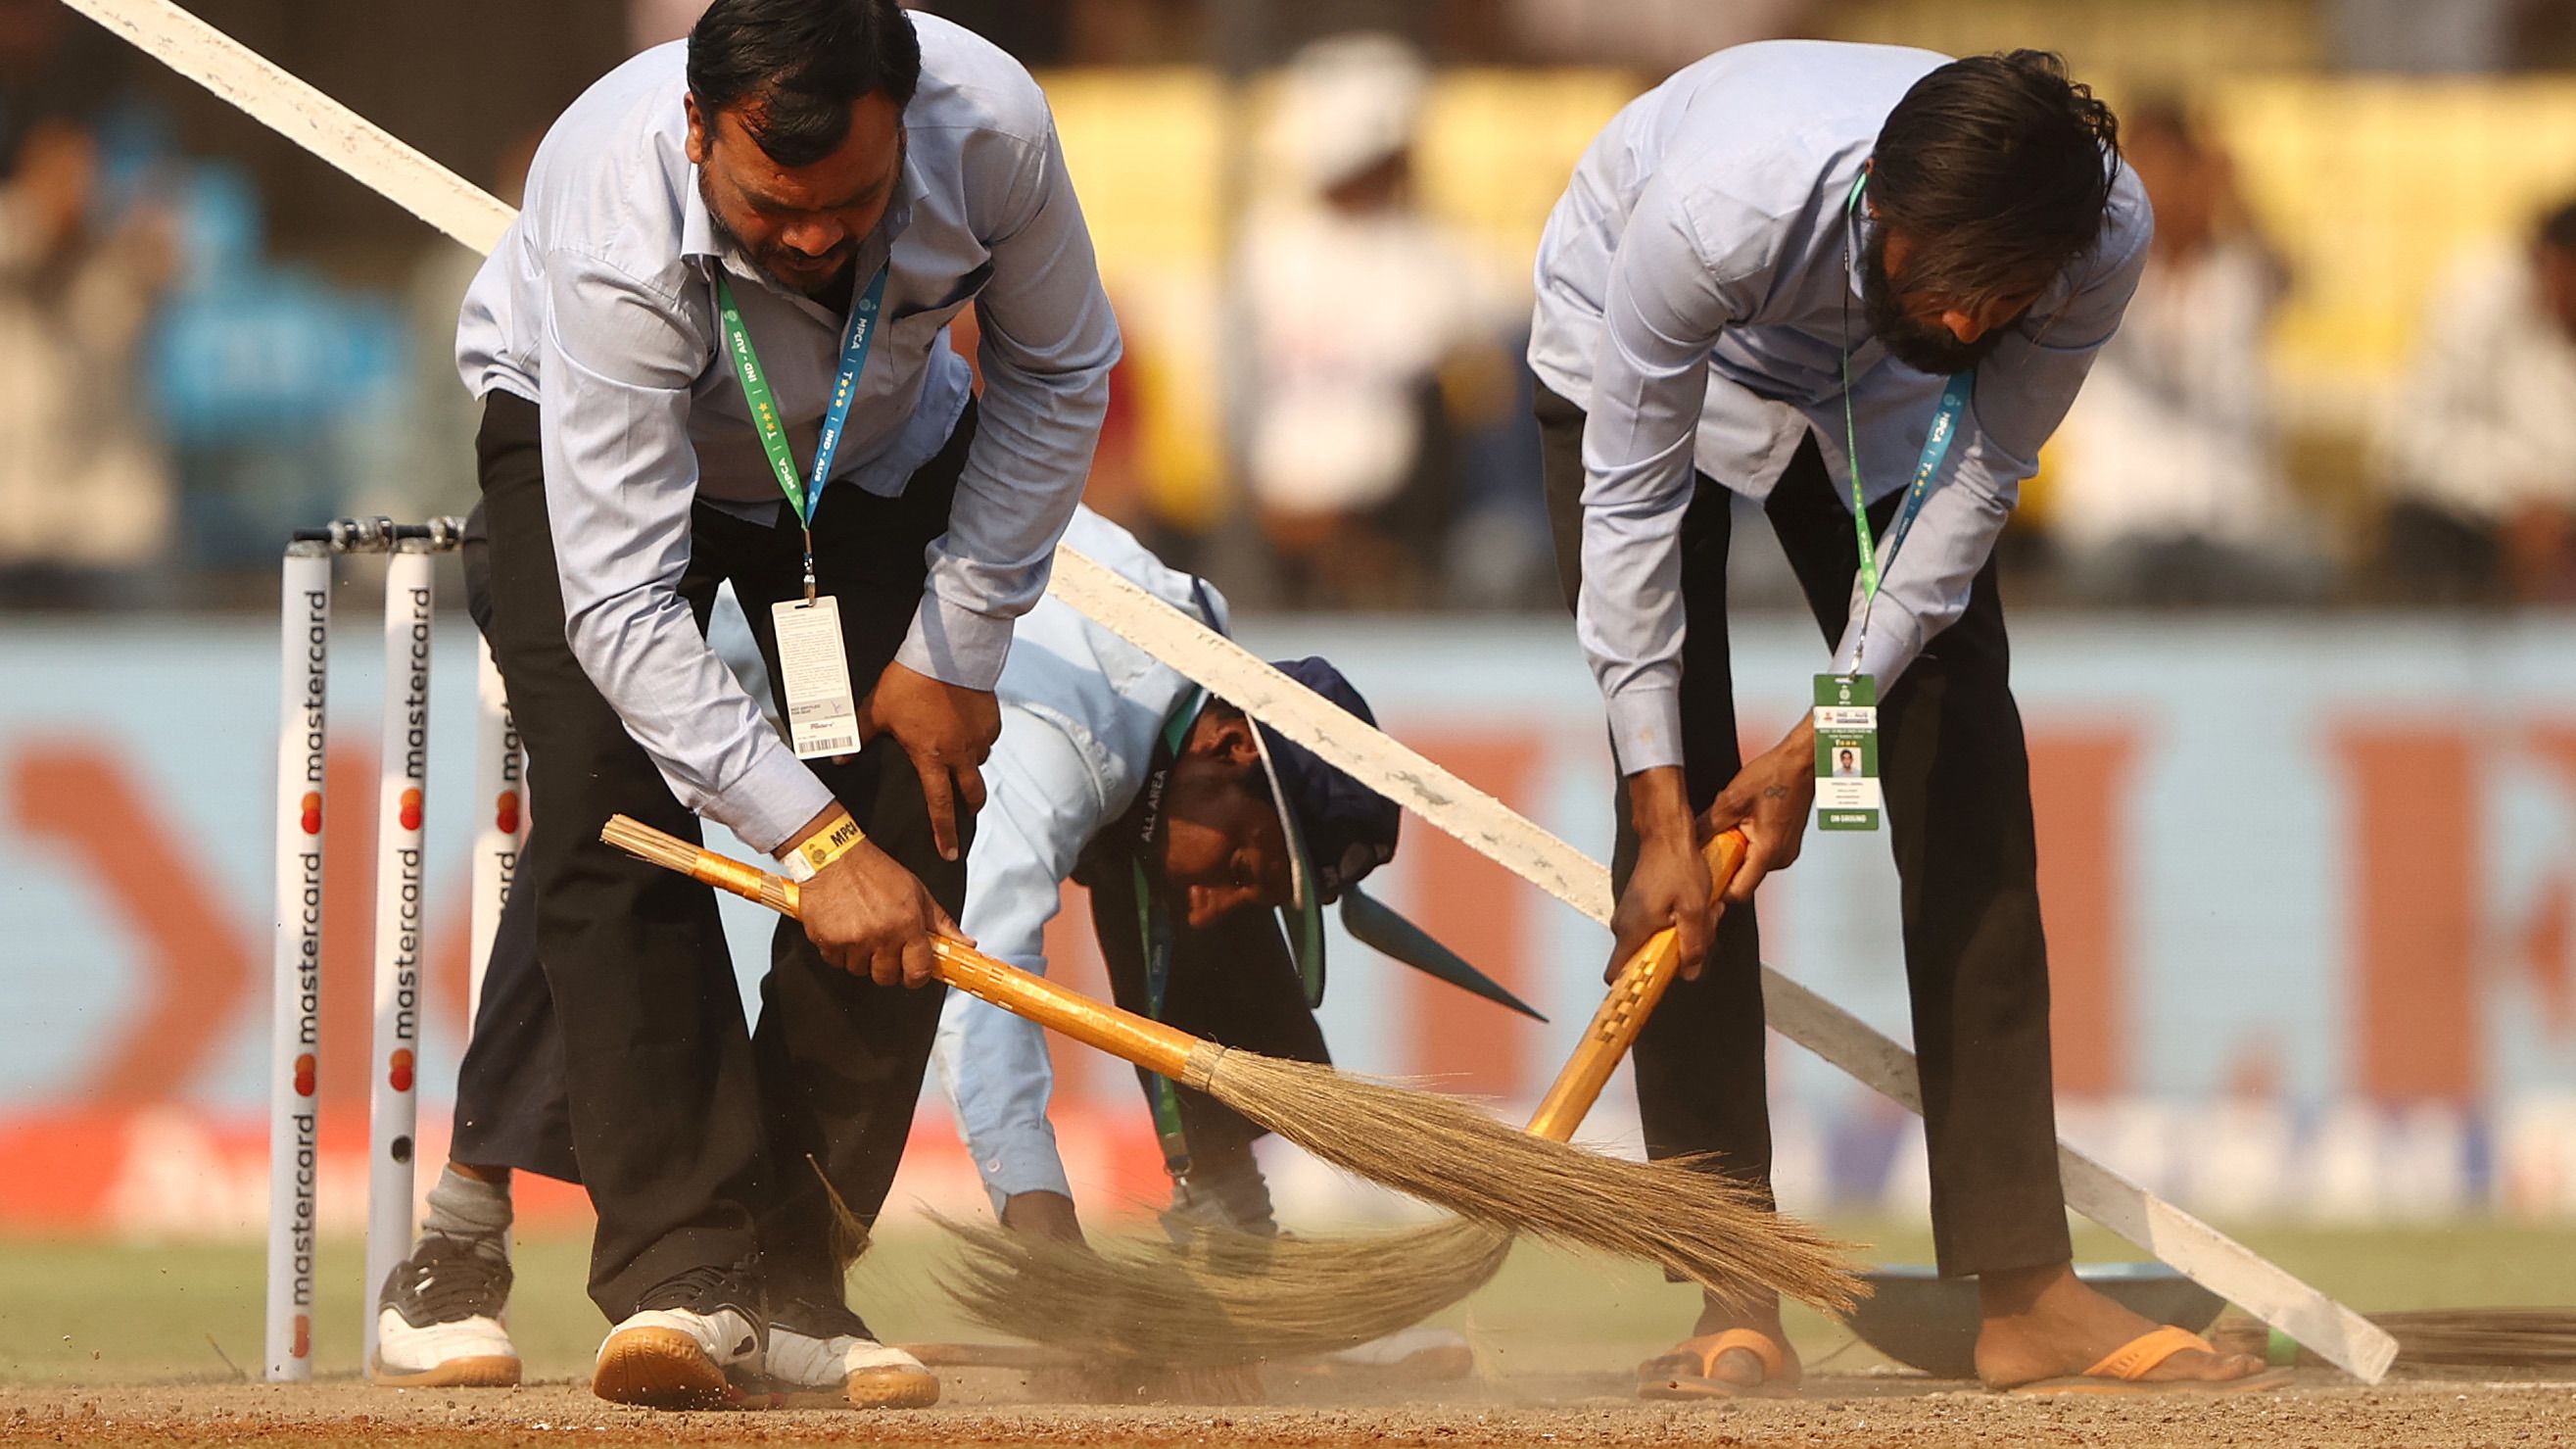 INDORE, INDIA - MARCH 01: The pitch is swept at the drinks break during day one of the Third Test match in the series between India and Australia at Holkare Cricket Stadium on March 01, 2023 in Indore, India. (Photo by Robert Cianflone/Getty Images)